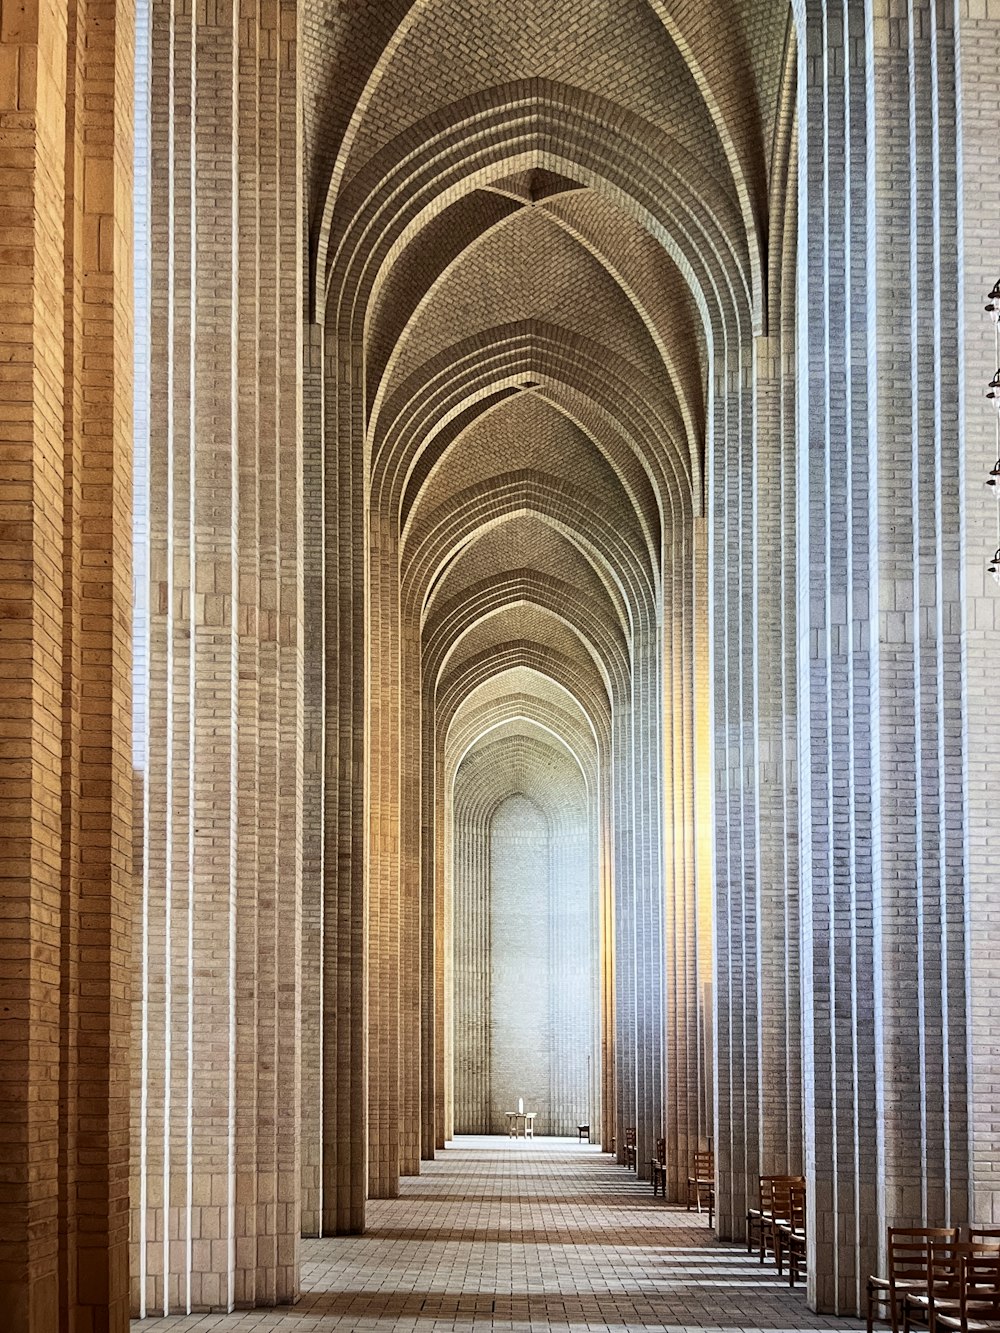 a large cathedral with a row of benches